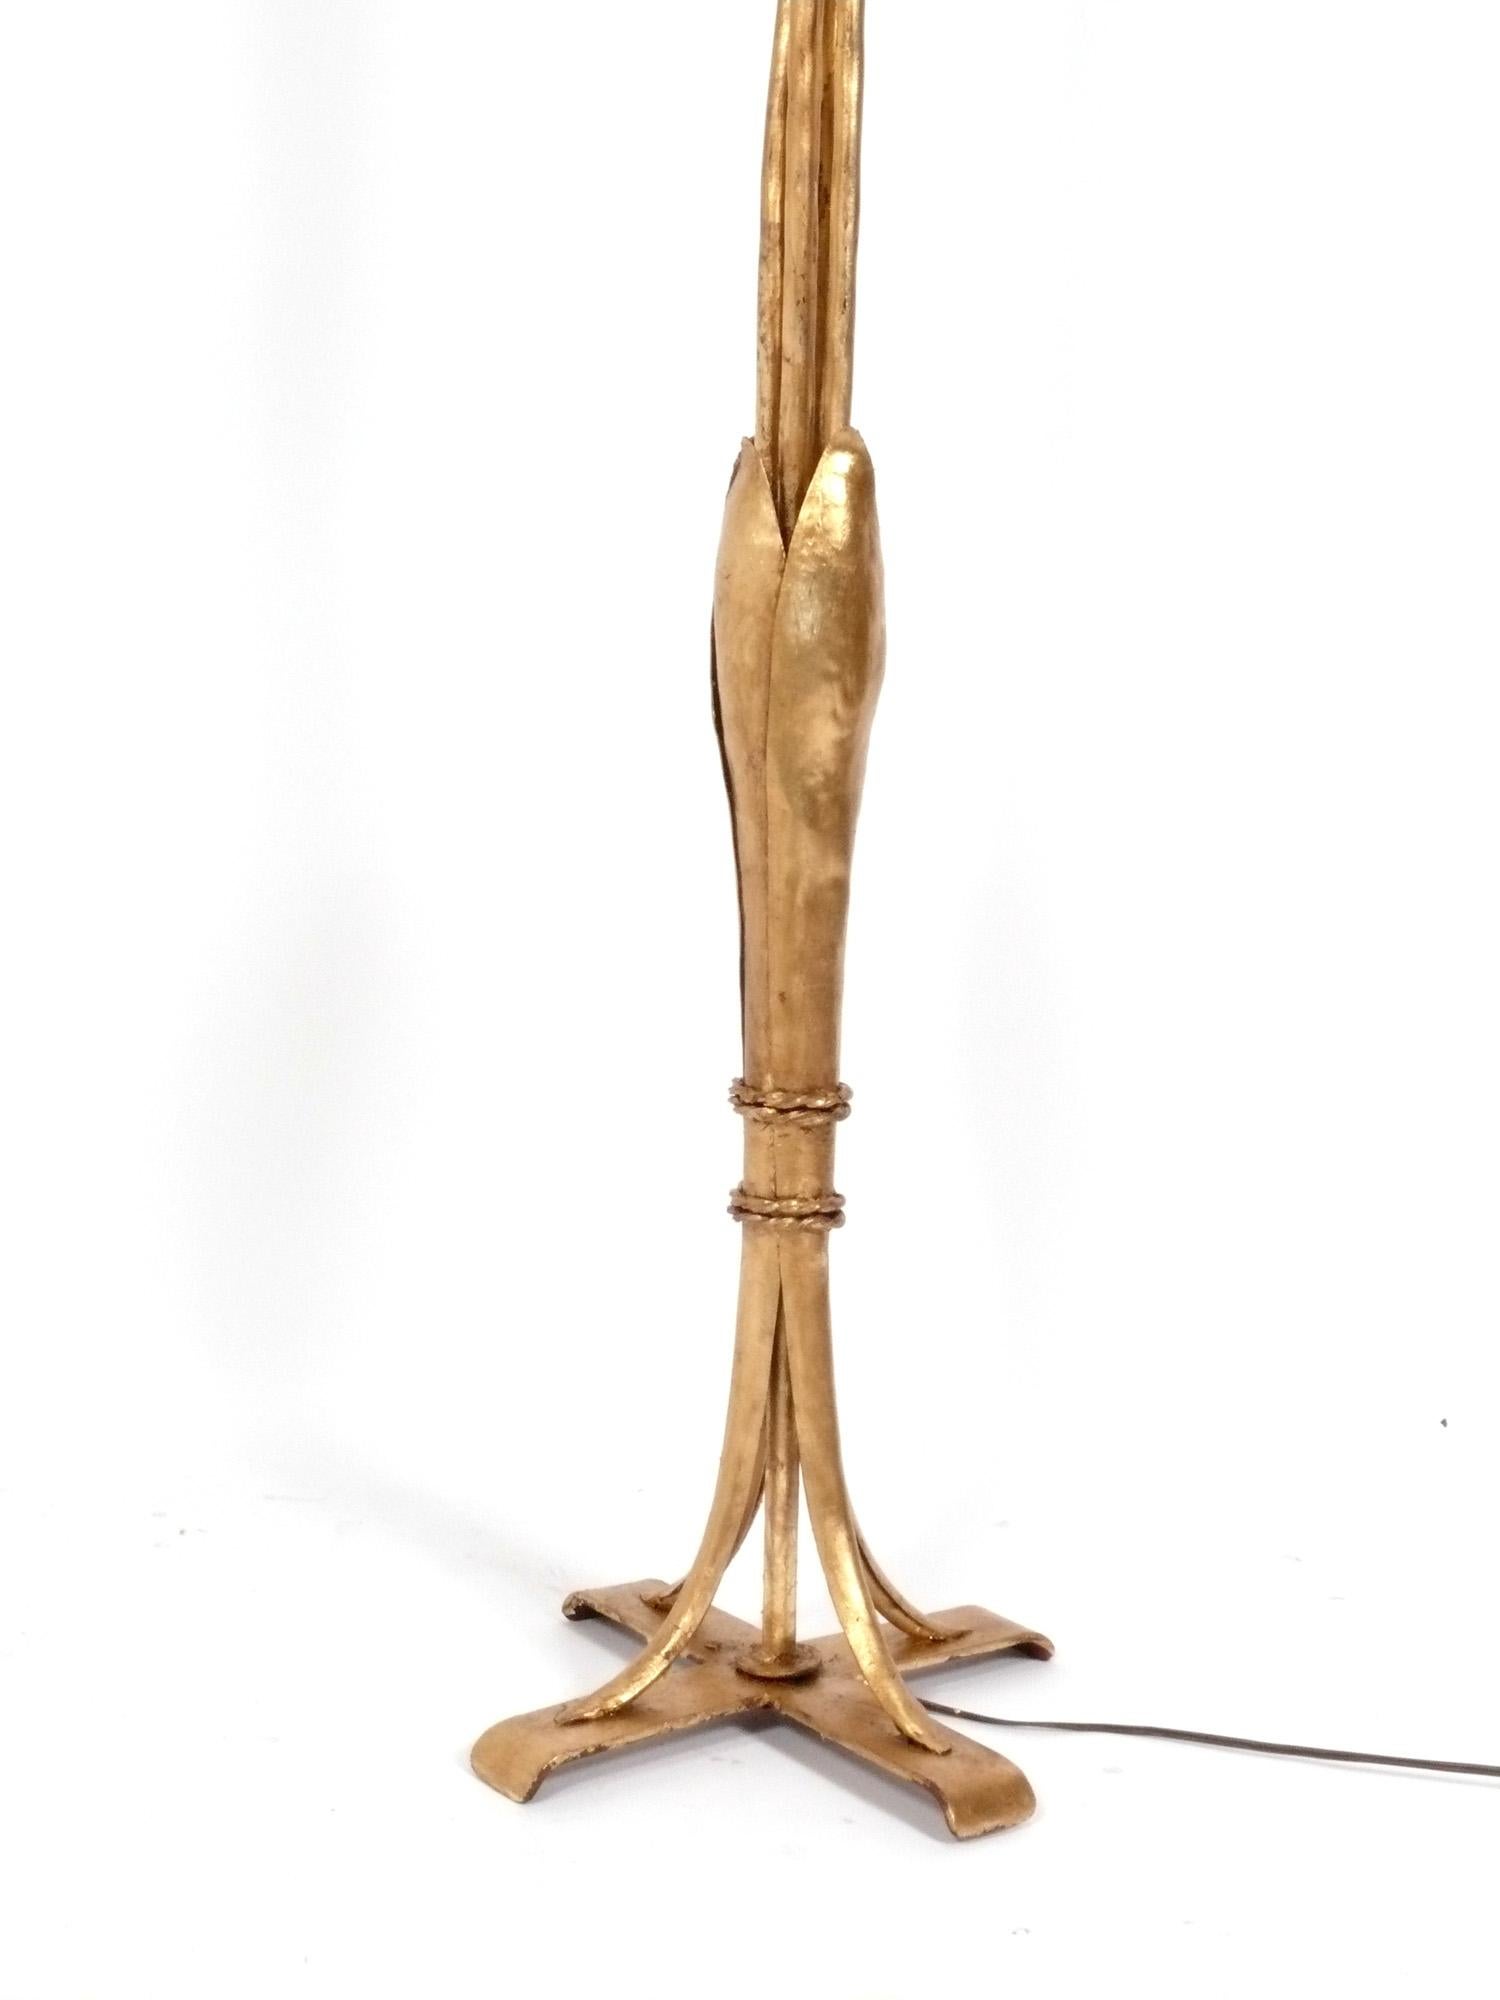 Hollywood Regency 1940s French Floriform Gilt Metal Floor Lamp attributed to Maison Bagues